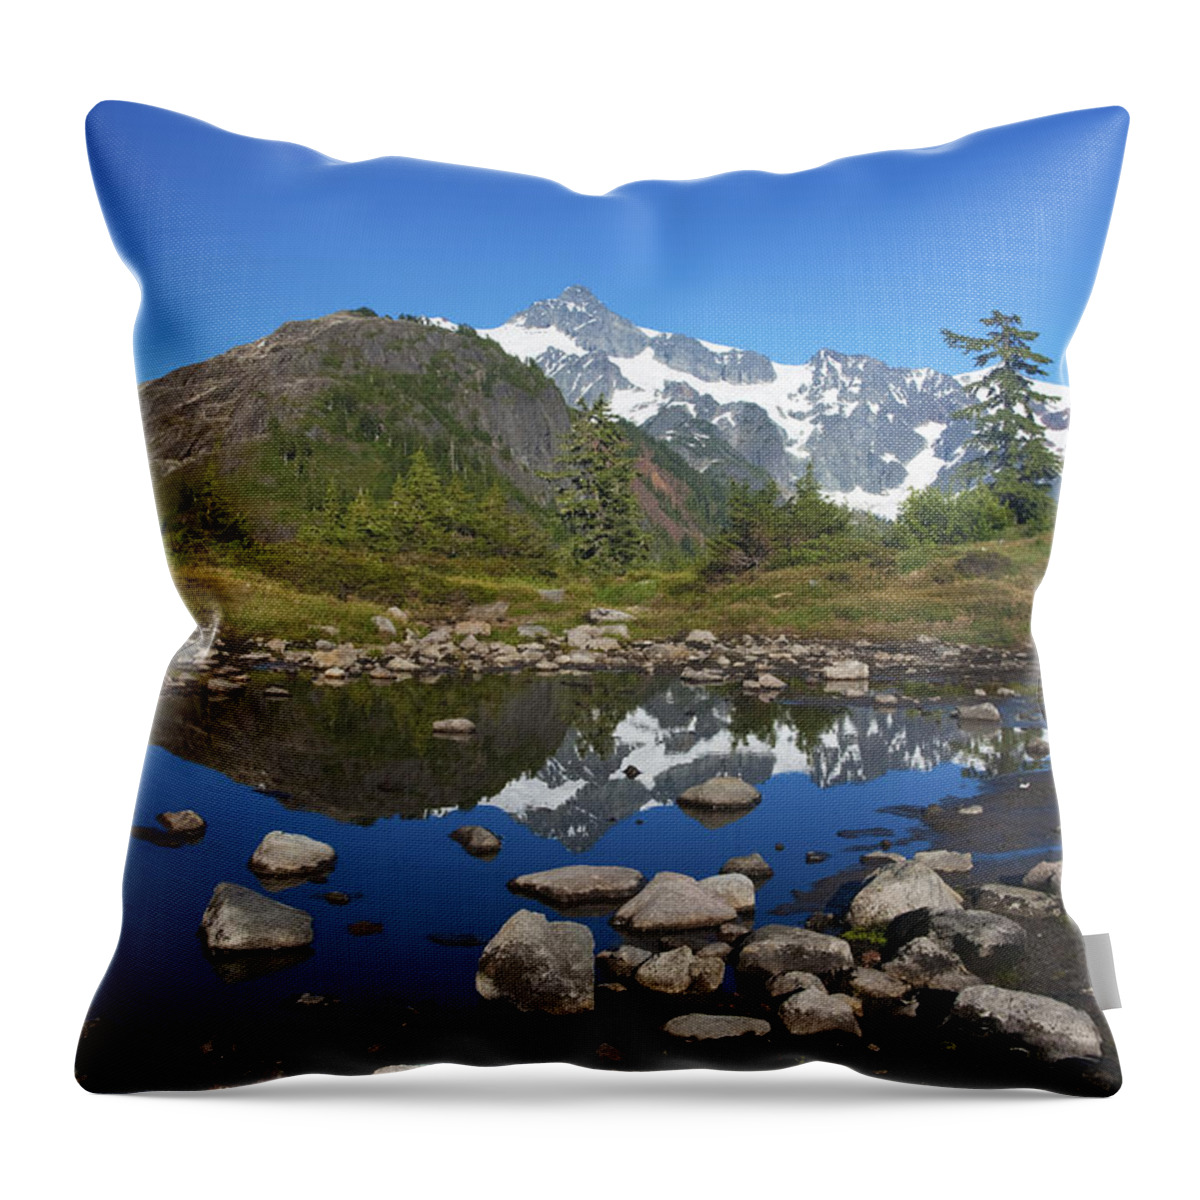 Landscape Throw Pillow featuring the photograph Mt. Shuksan Puddle Reflection by Scott Cunningham